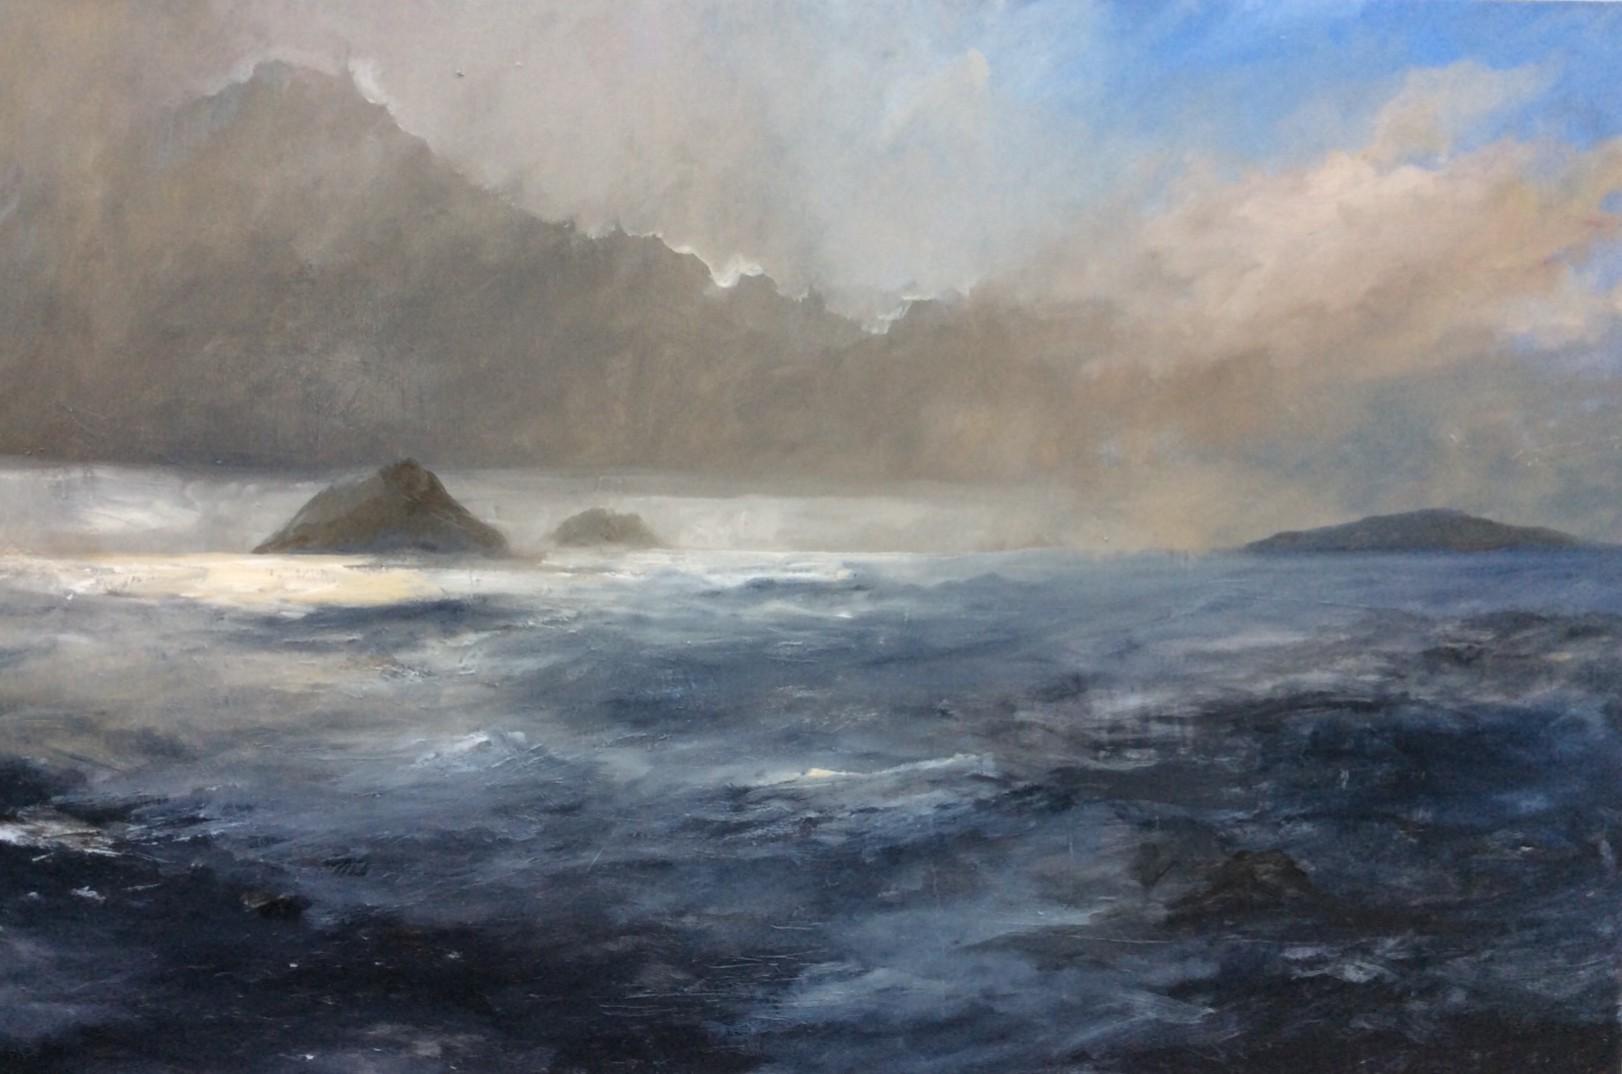 Kim Pragnell

Distant Landfall

Original Seascape Painting

Oil paint on Board

Canvas Size: H 57cm x W 87cm x D 2.5cm

Sold Unframed

Free Shipping

Seascape painted in oil on board, created from the inspiration of solitude. Despite the close